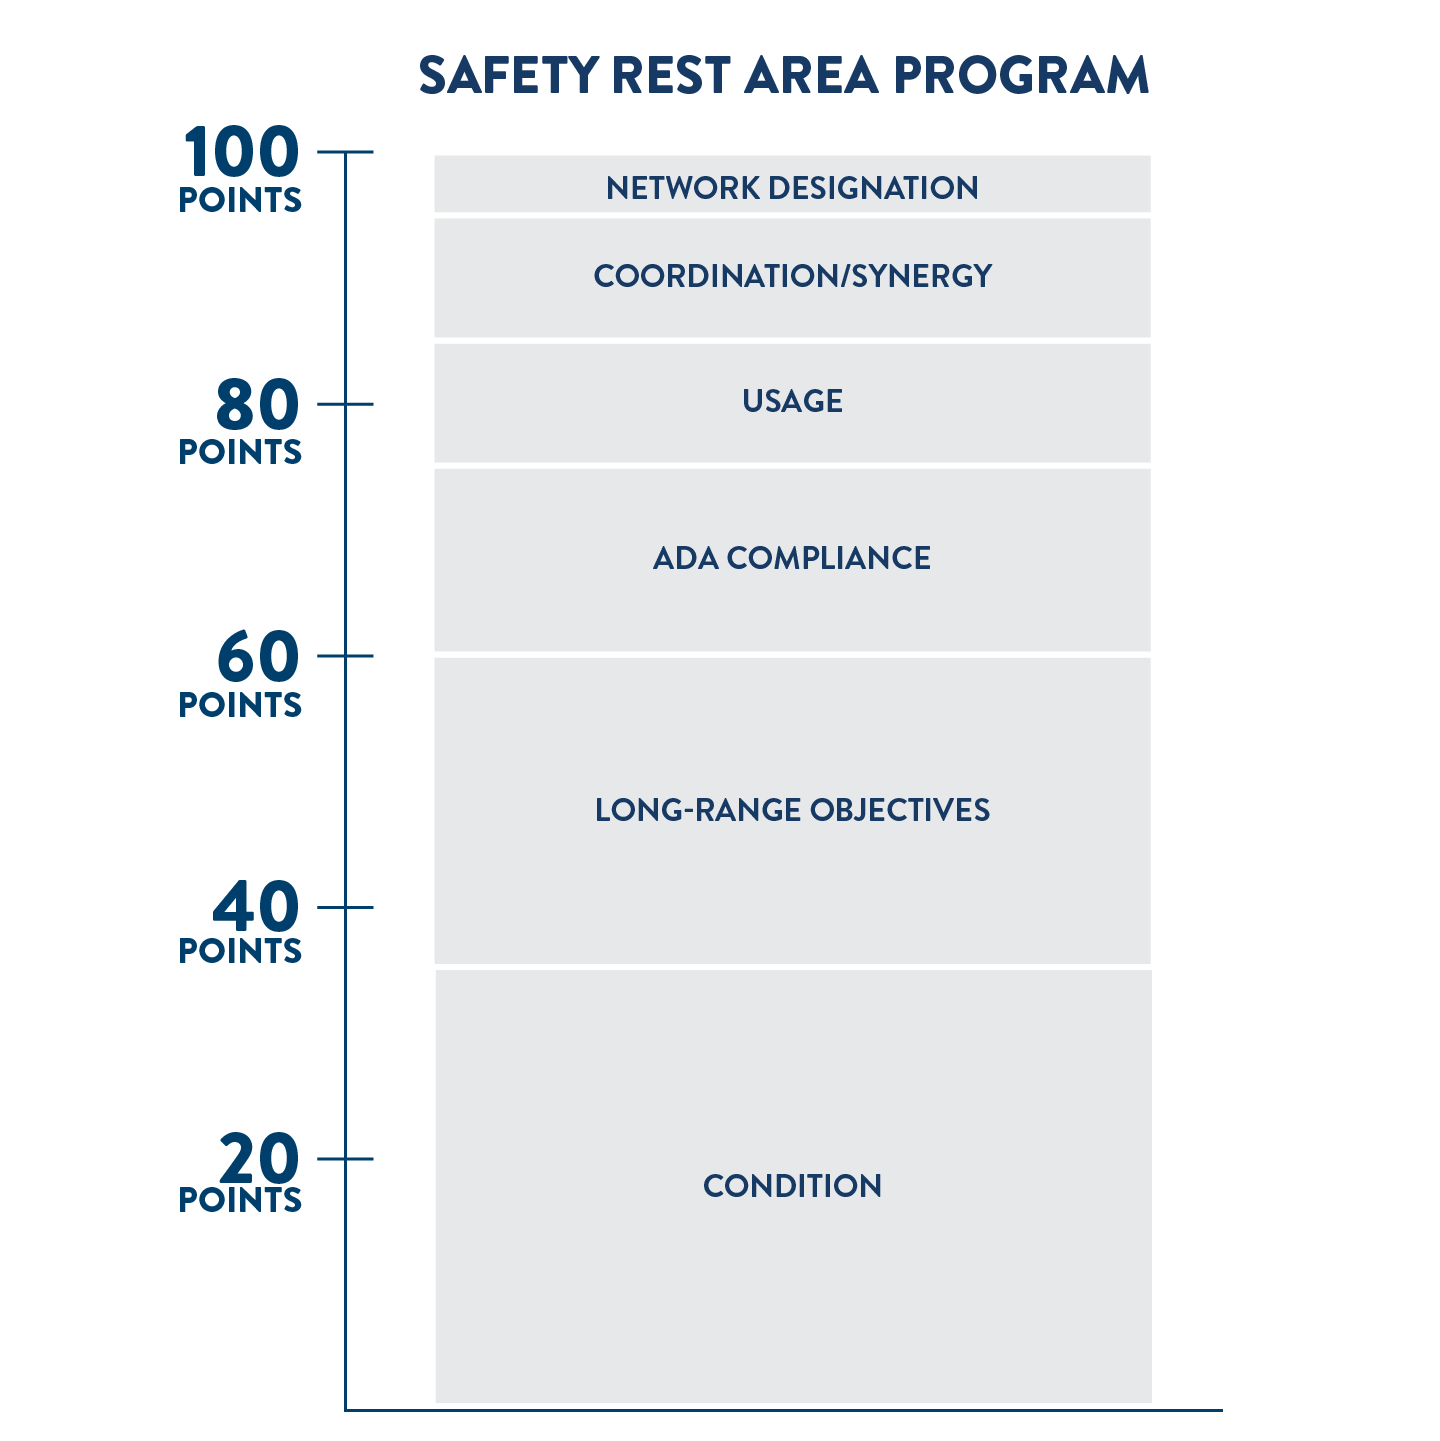 Scoring criteria for safety rest area projects. Out of 100 possible points, 35 points are based on condition, 25 points are based on long-range objectives, 15 points are based on compliance with the Americans with Disabilities Act, 10 points are based on usage, 10 points are based on coordination and synergy with other work, and 5 points are based on network designation.